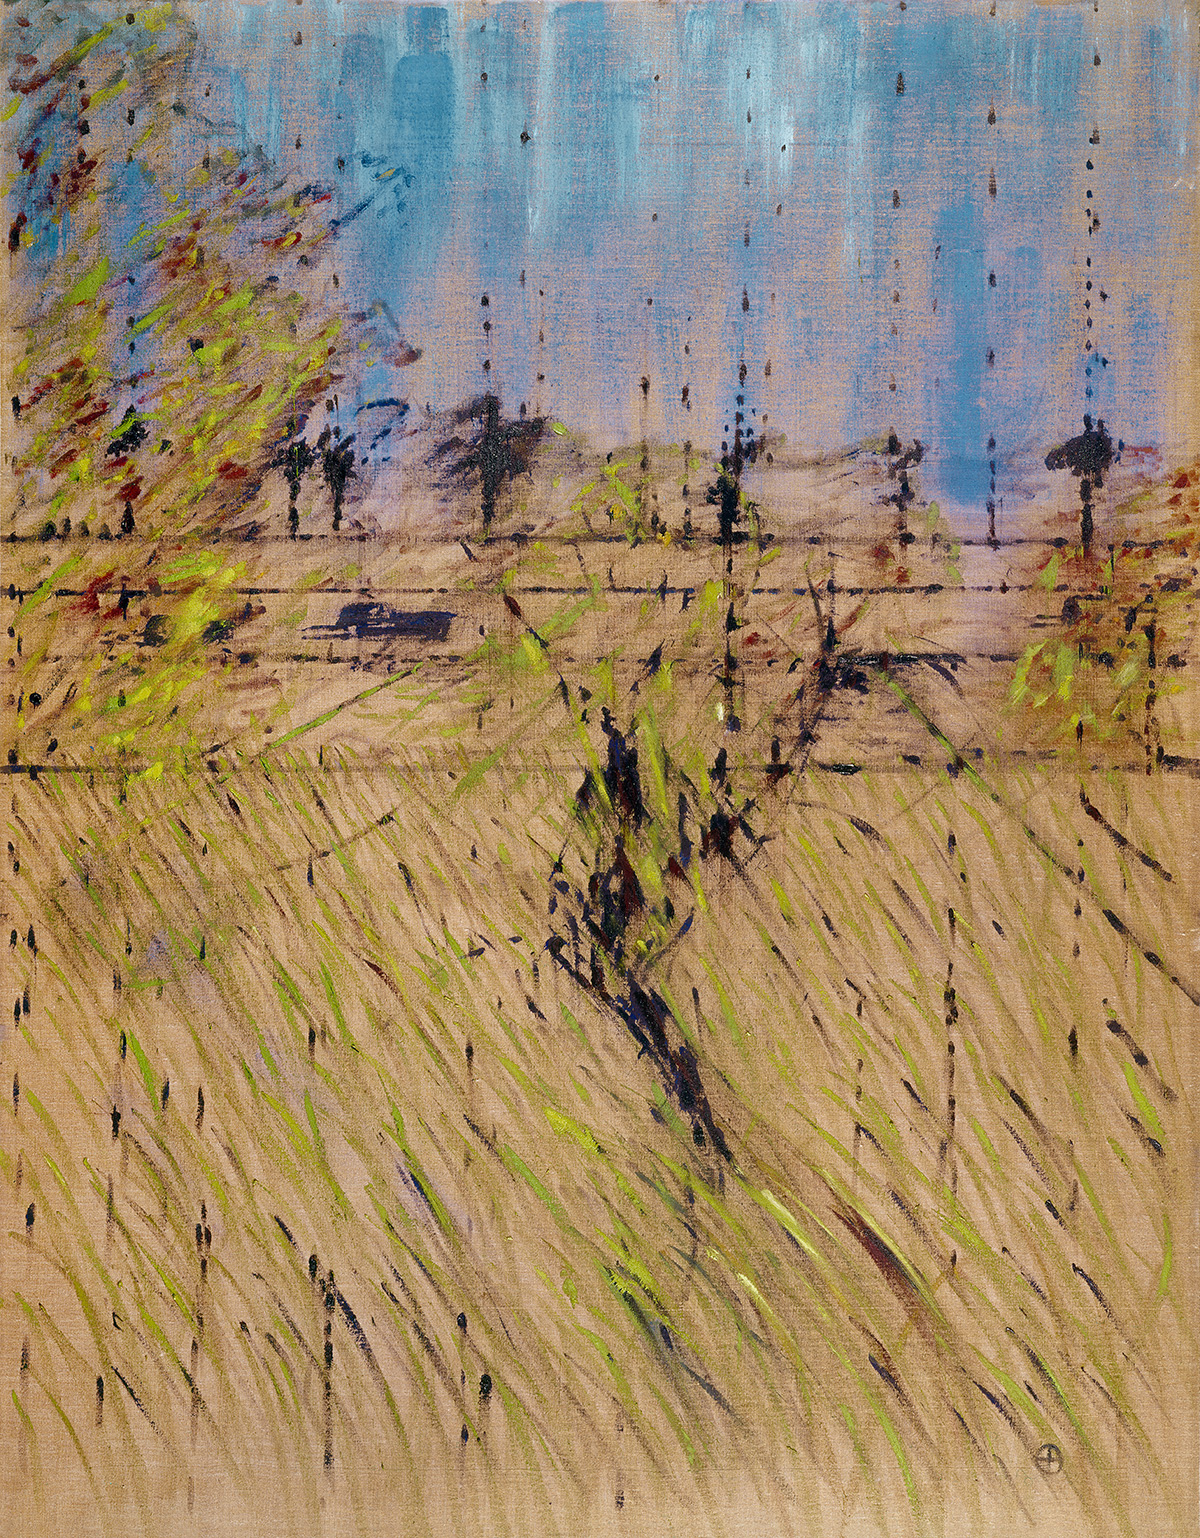 Landscape, 1952. Oil on canvas. CR no. 52-04. © The Estate of Francis Bacon / DACS London 2022. All rights reserved.